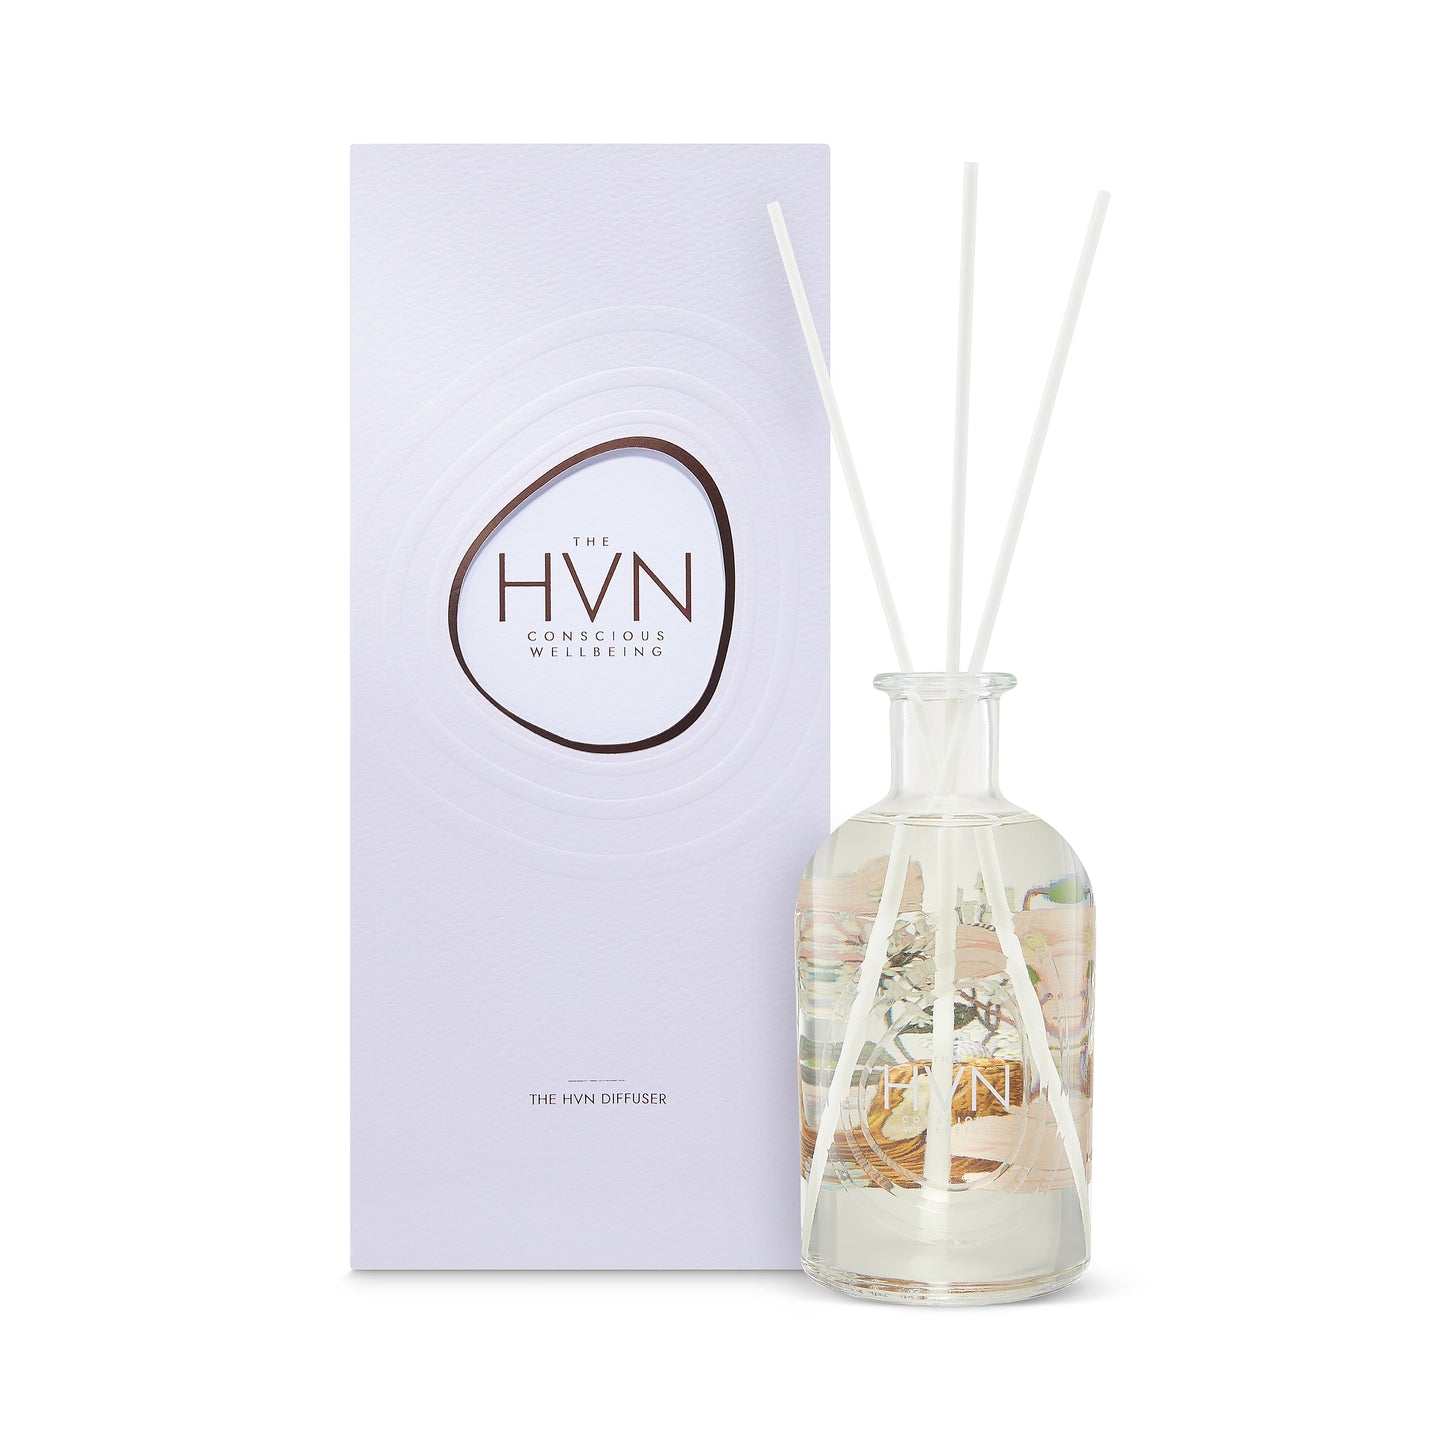 The HVN Diffuser